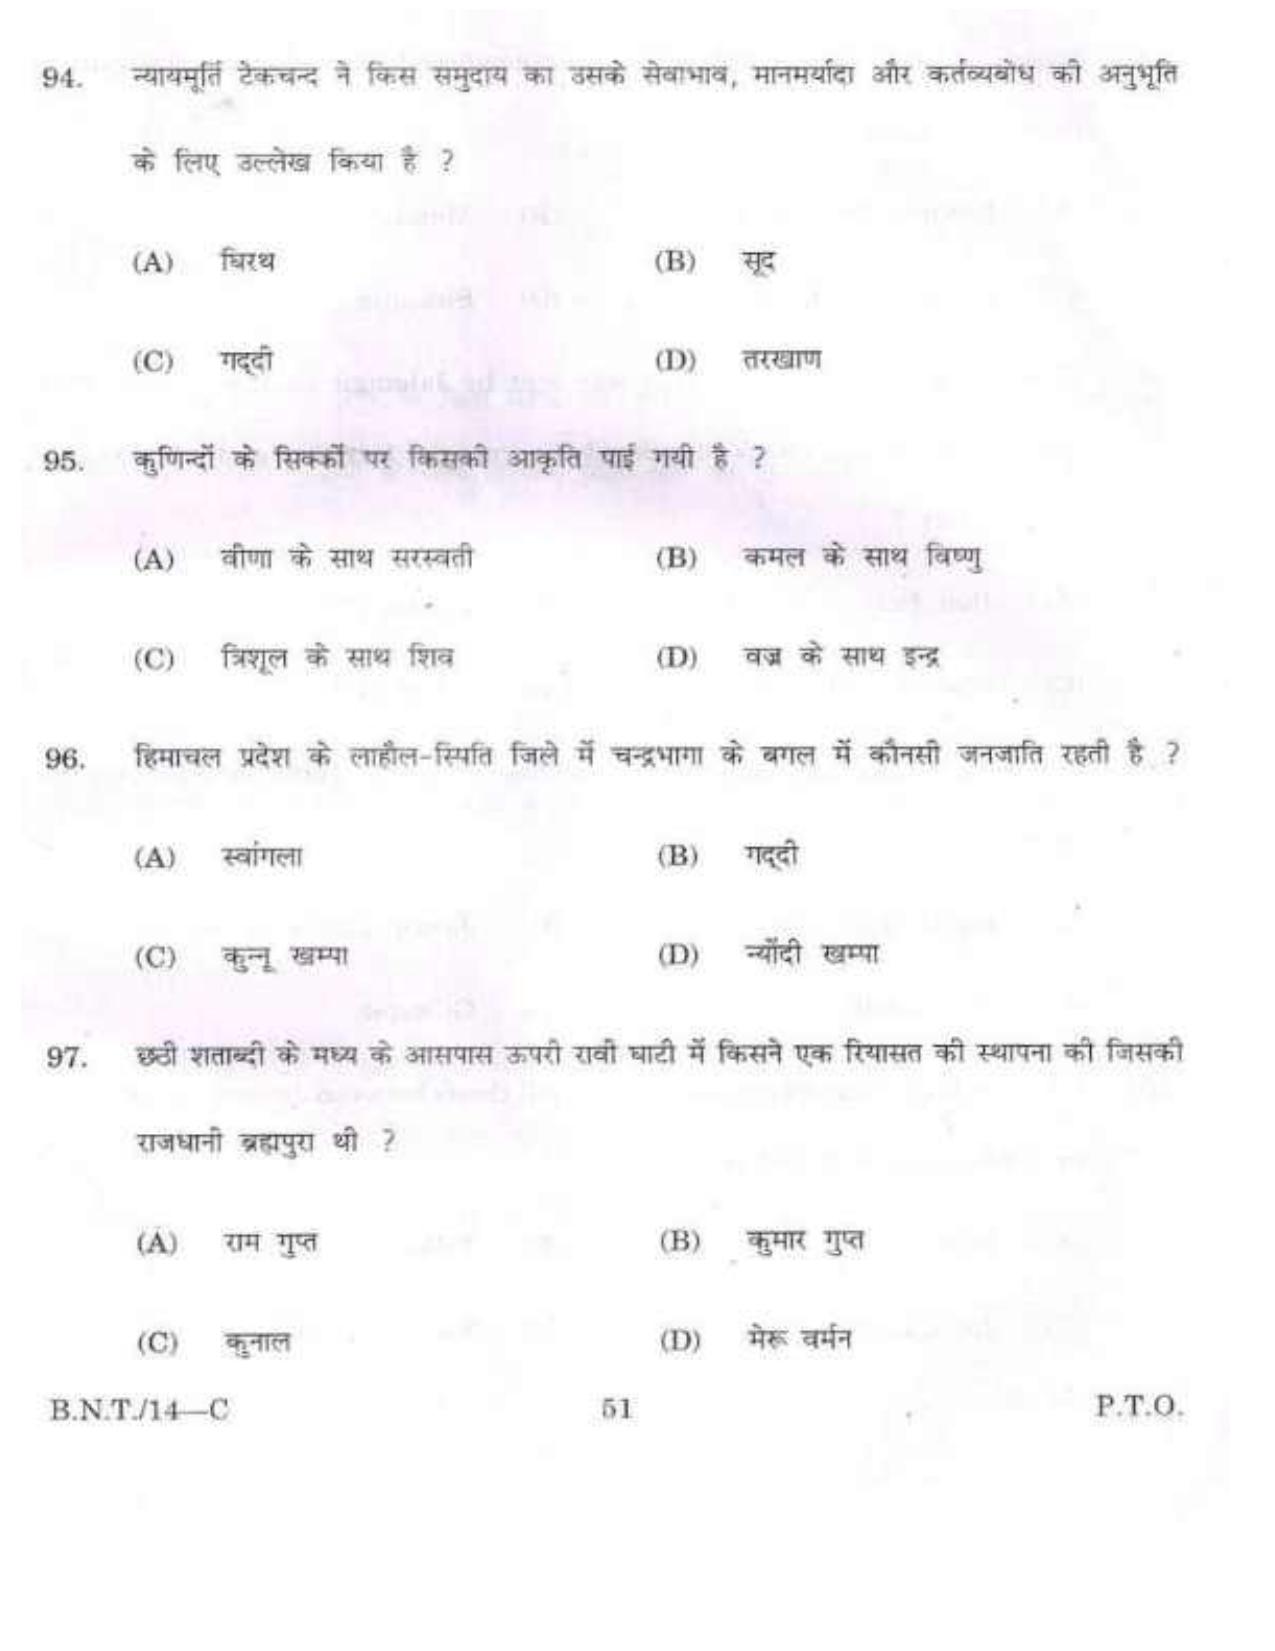 BSMFC Recovery Agent Old Question Papers for General Knowledge - Page 51